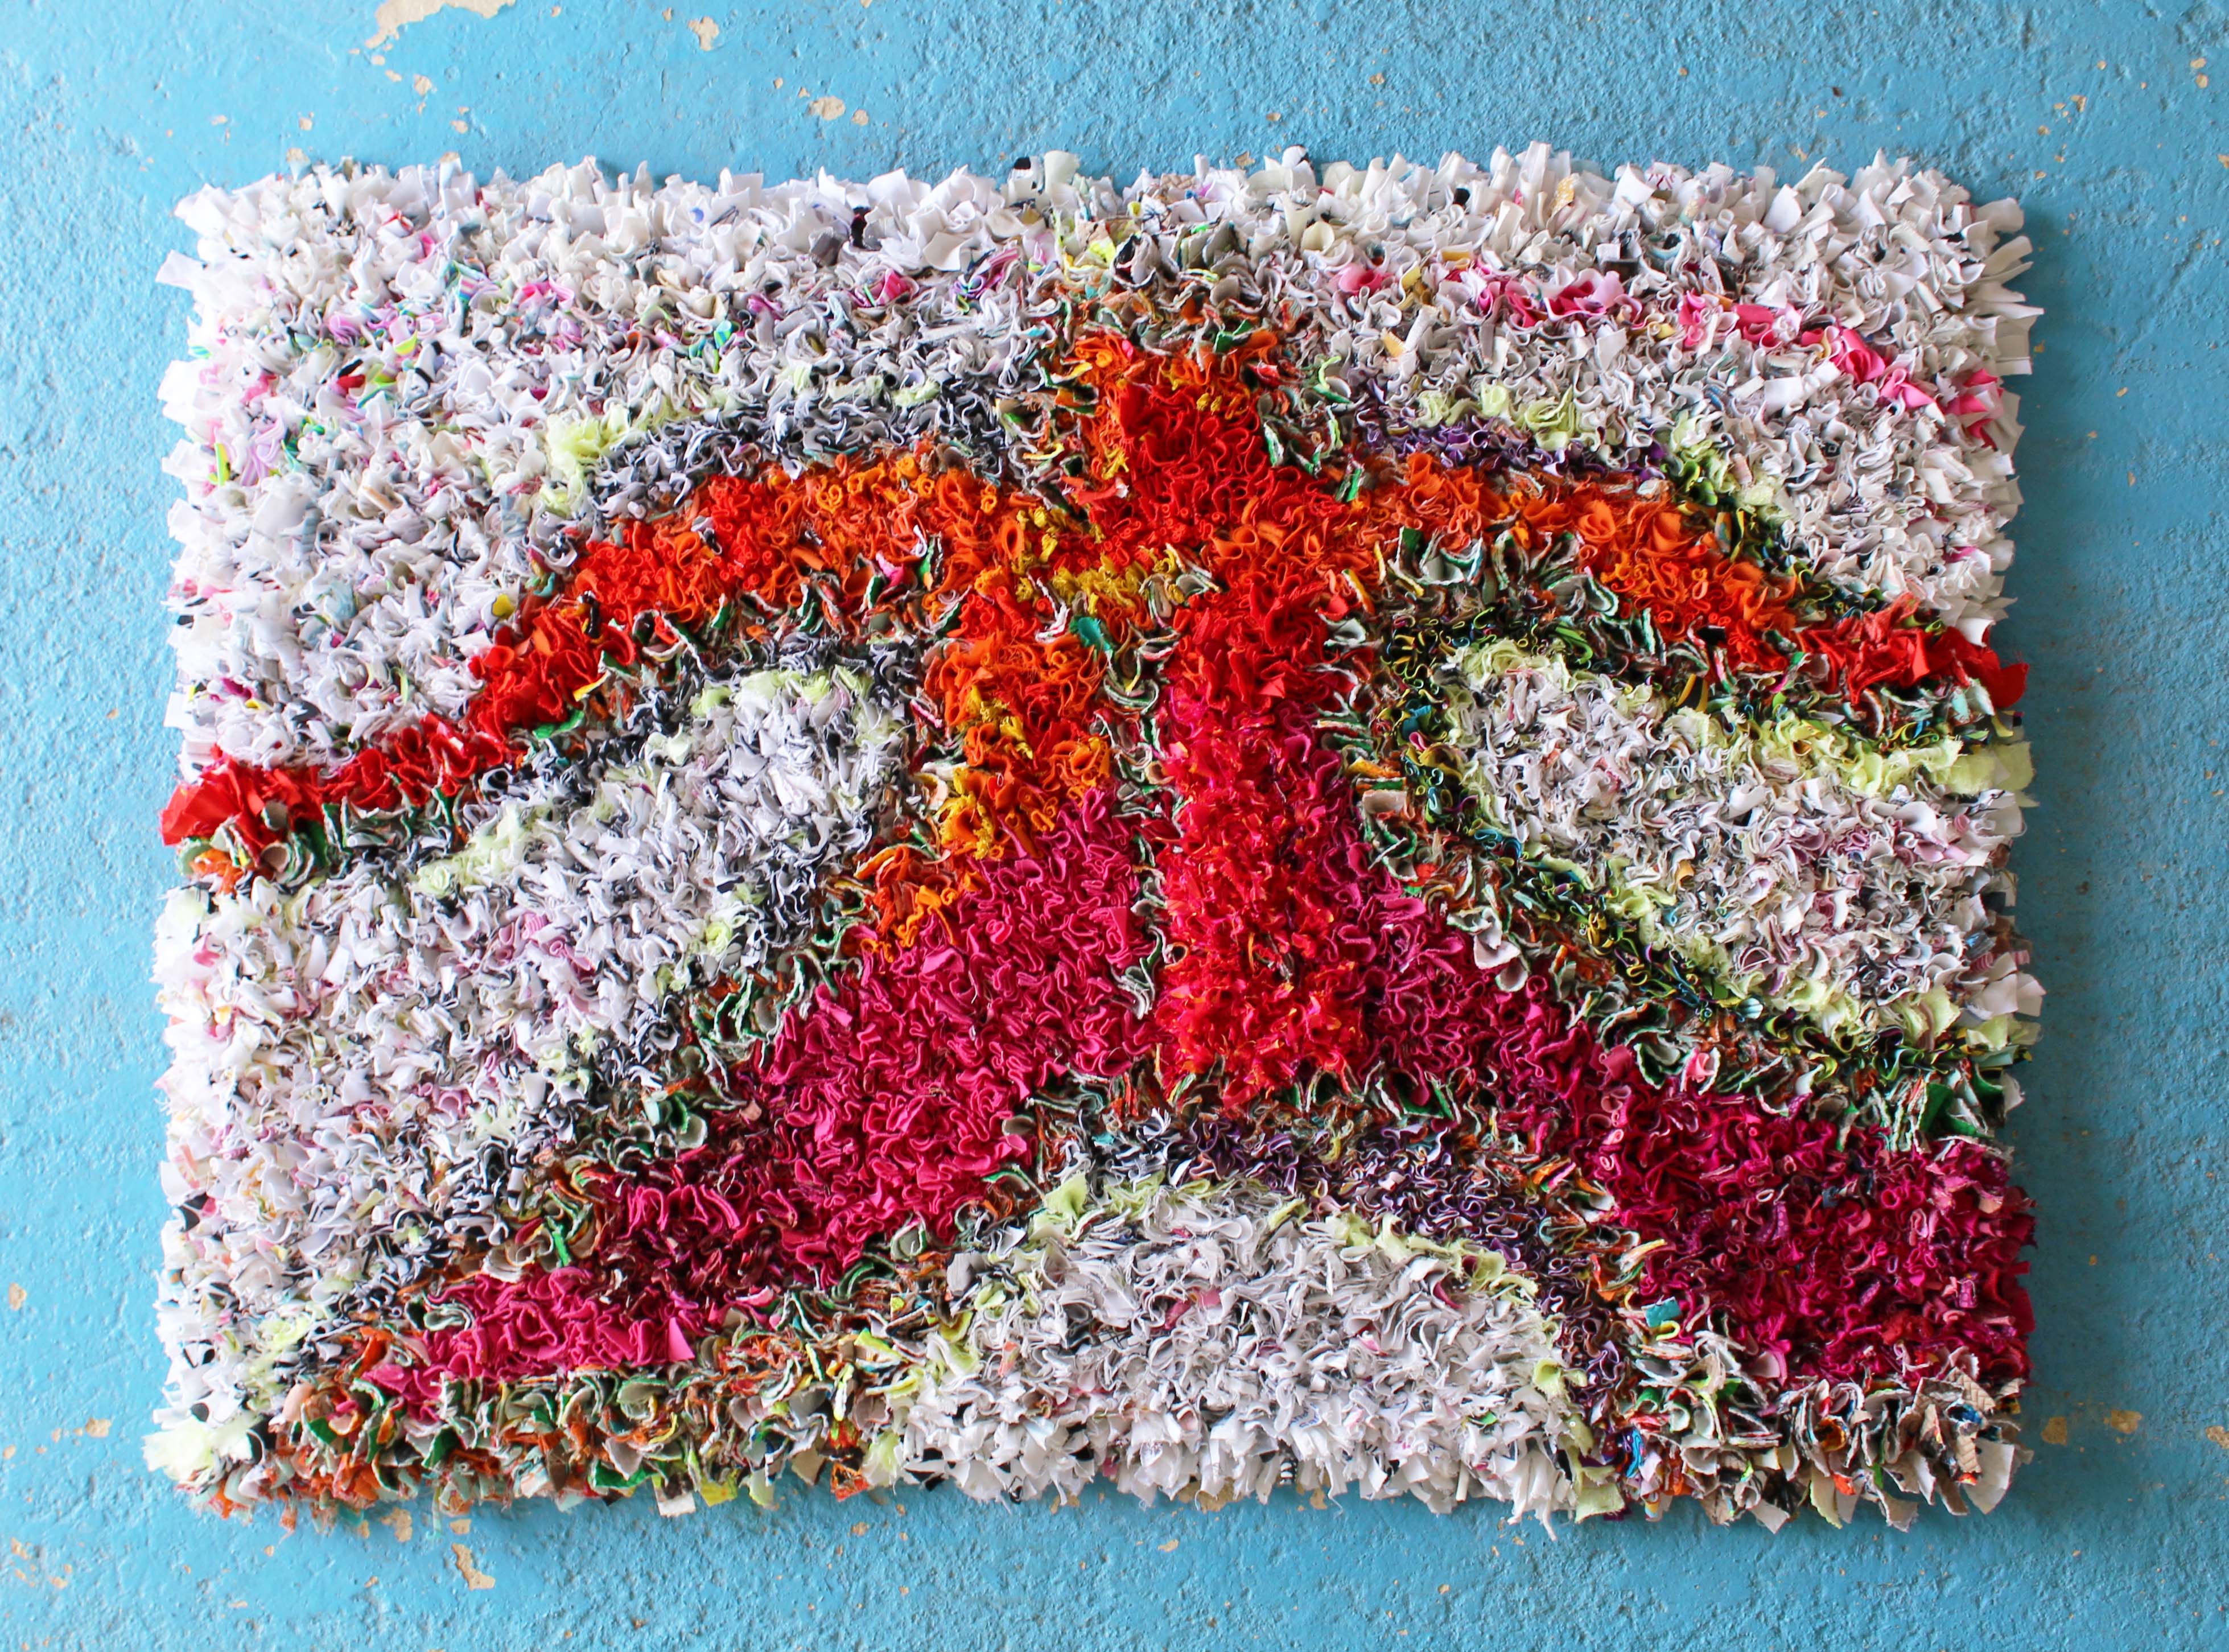 Beautiful rag rug shaped like a person in the shaggy rag rugging technique with orange and pink